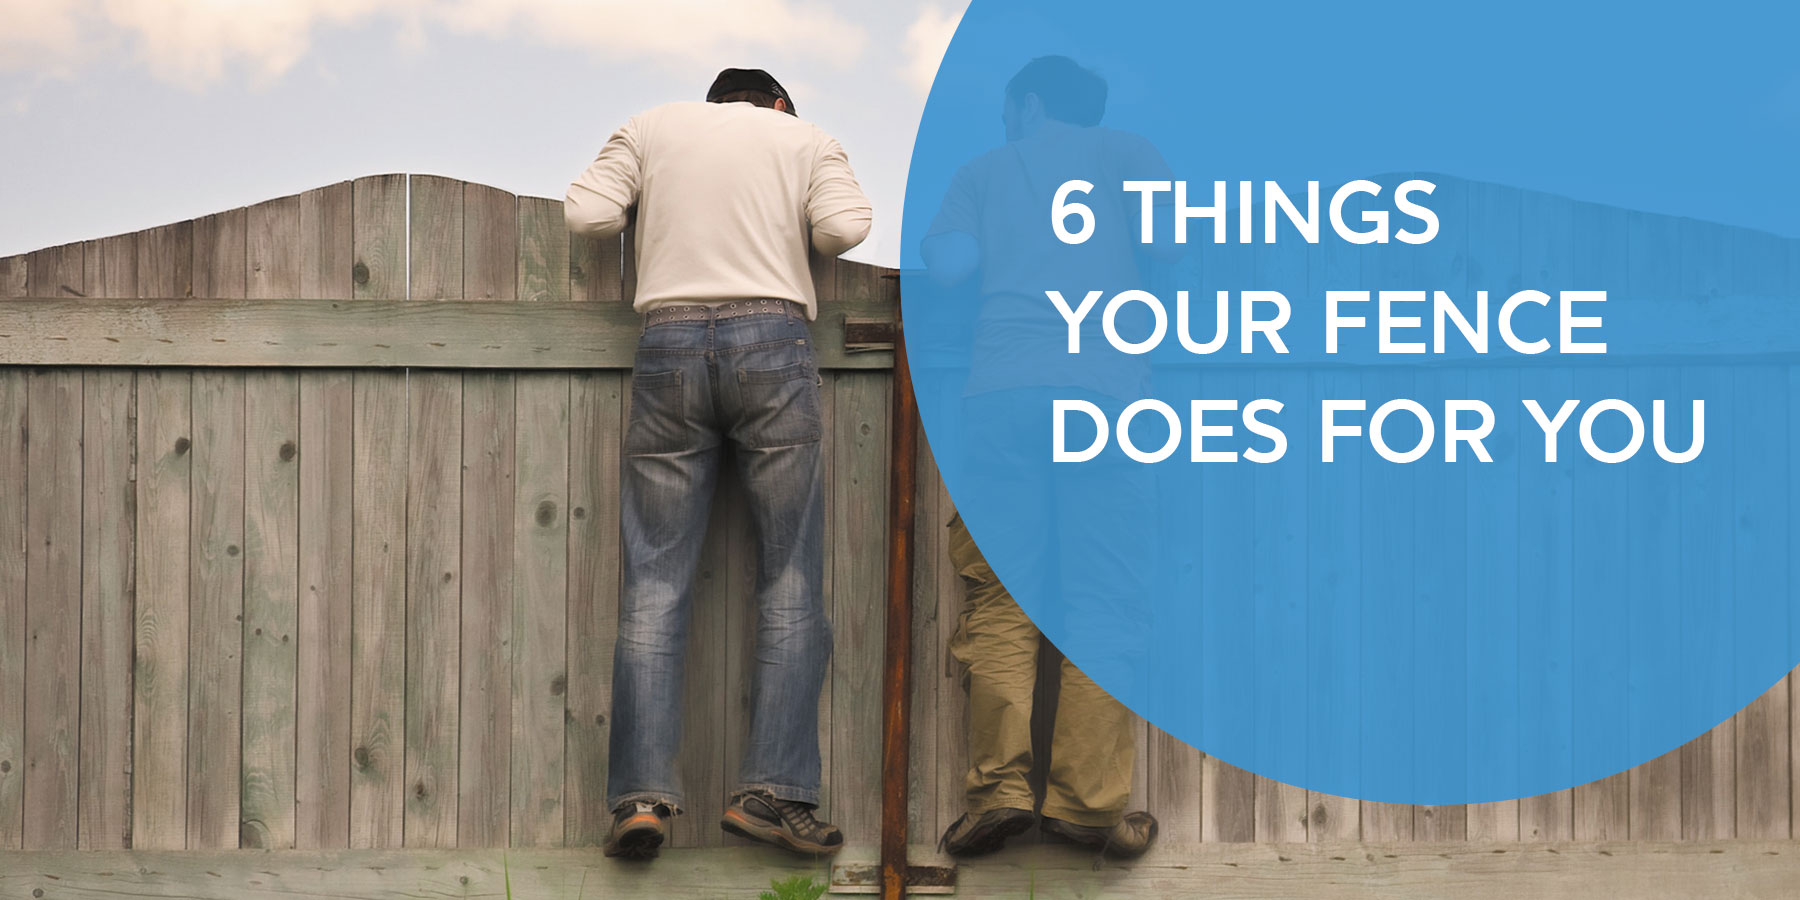 6 THINGS YOUR FENCE DOES FOR YOU